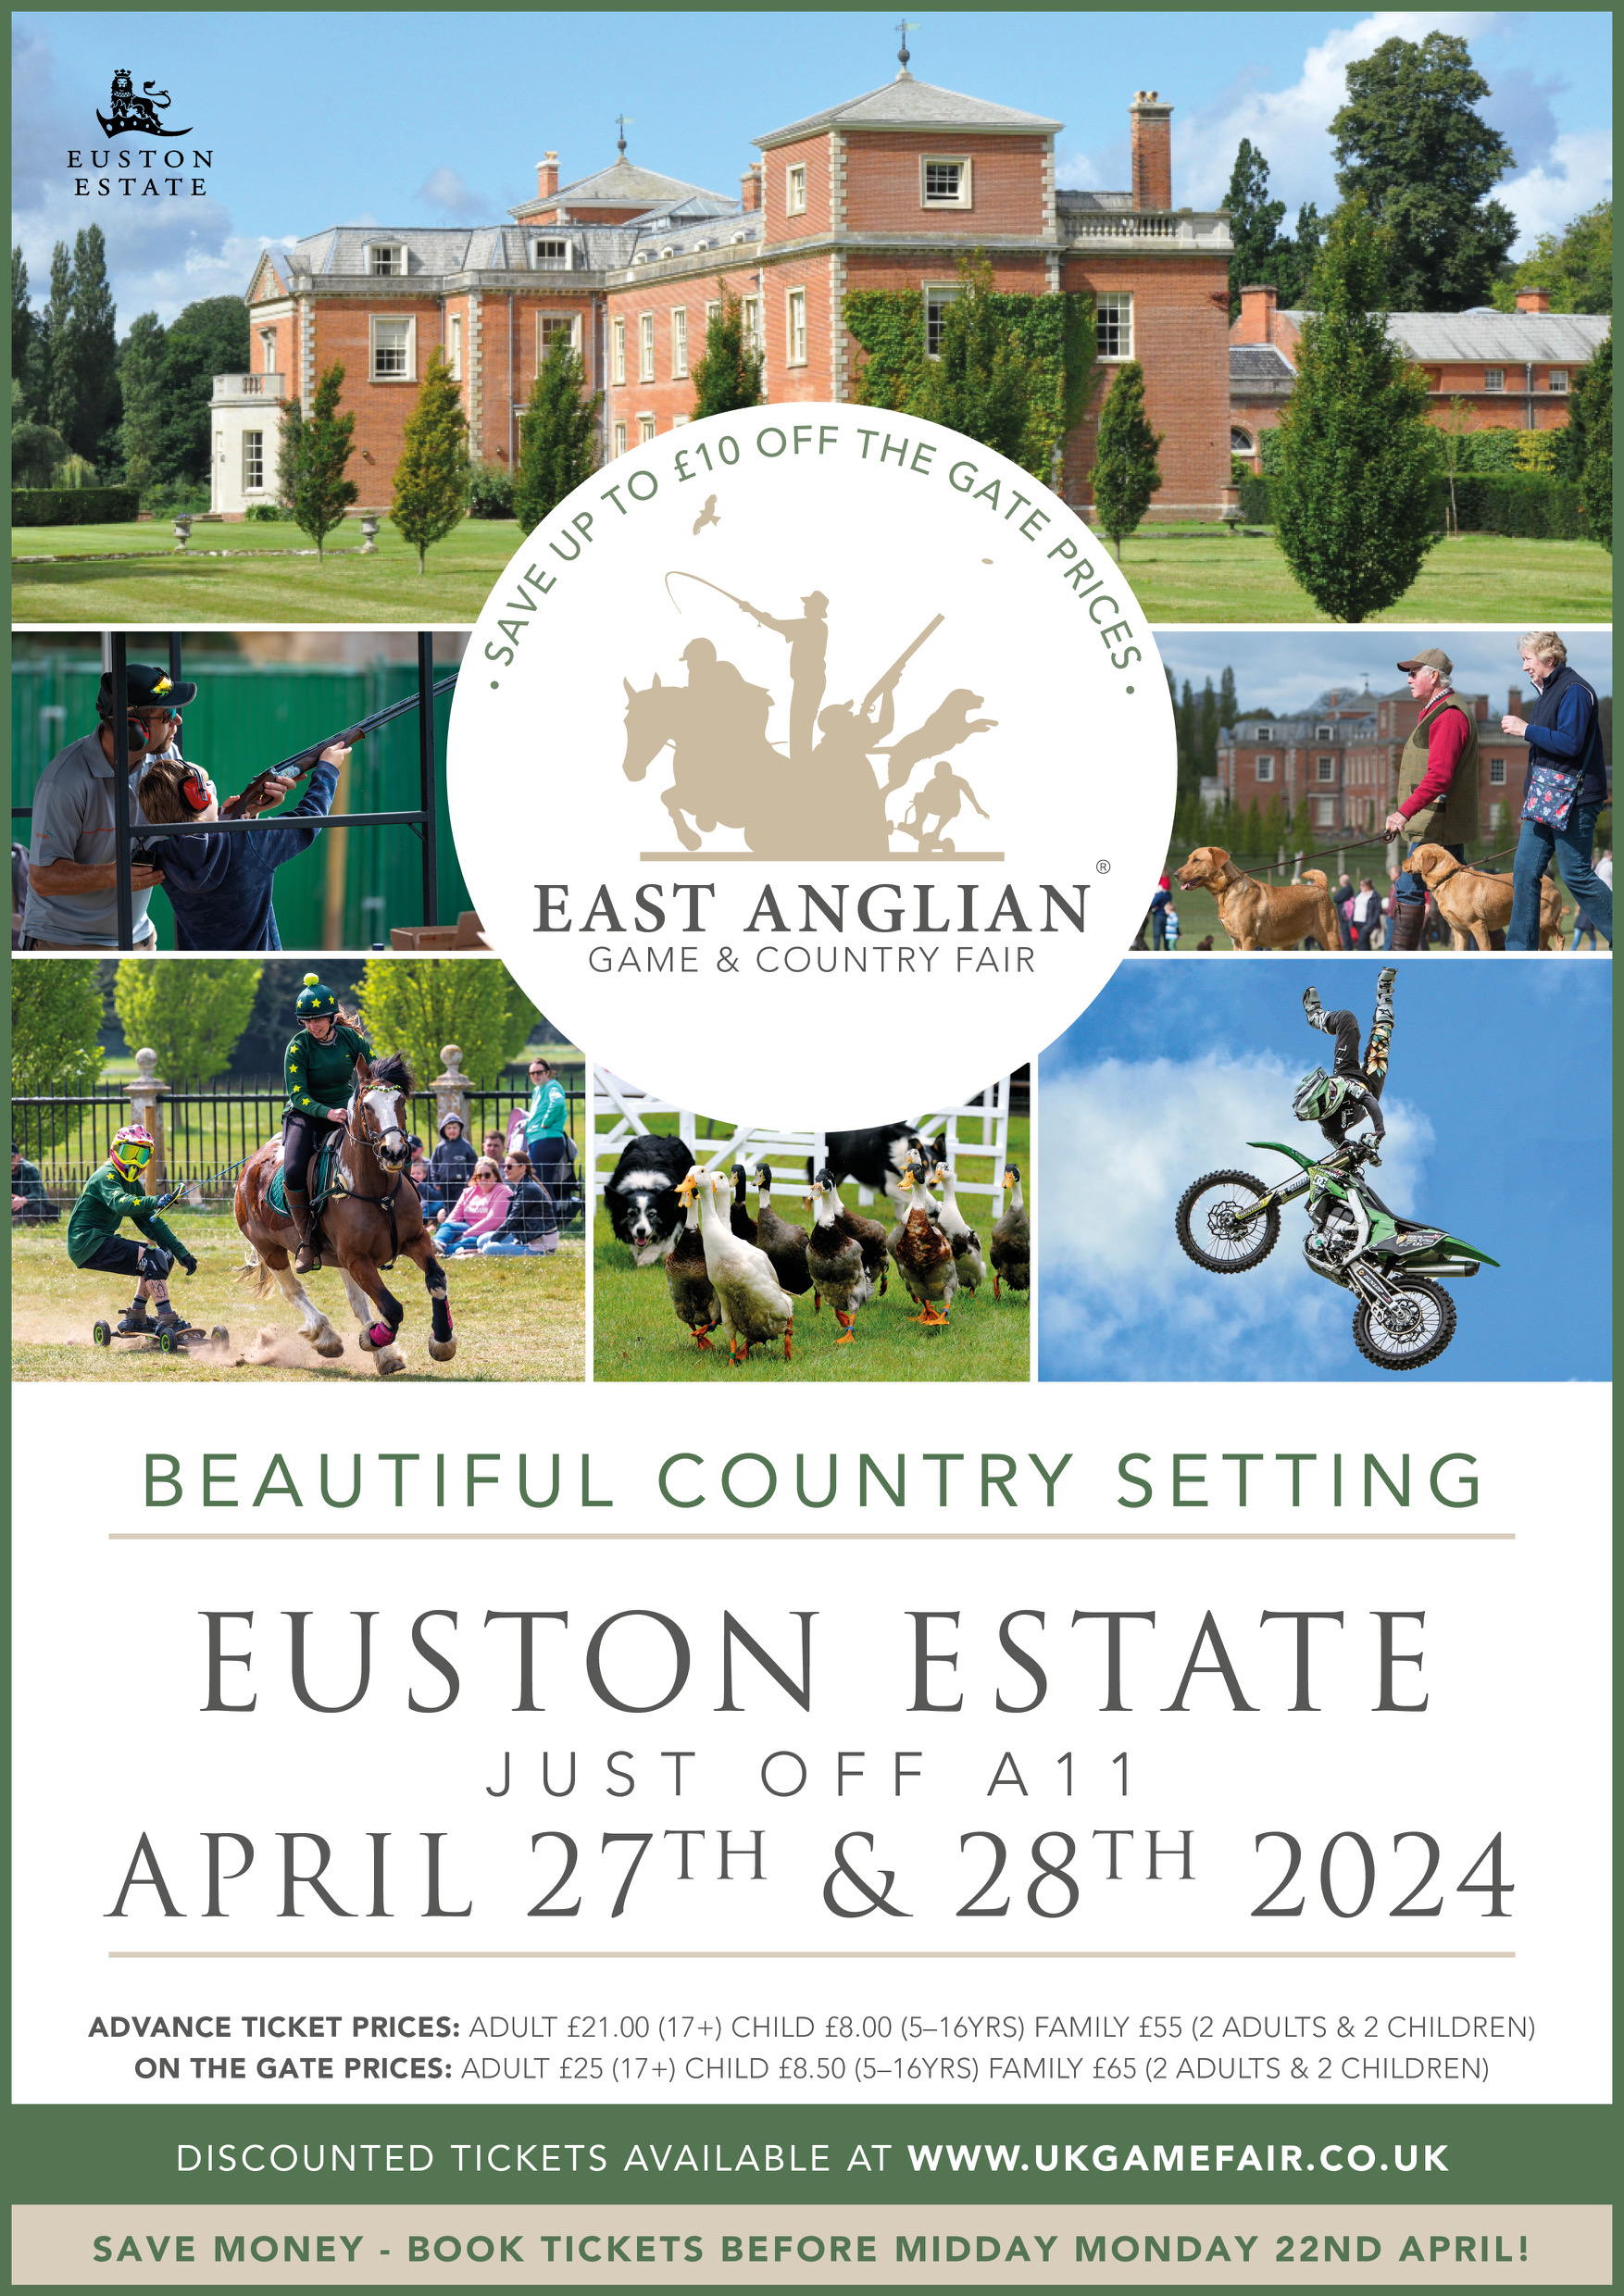 The East Anglian Game & Country Fair   image